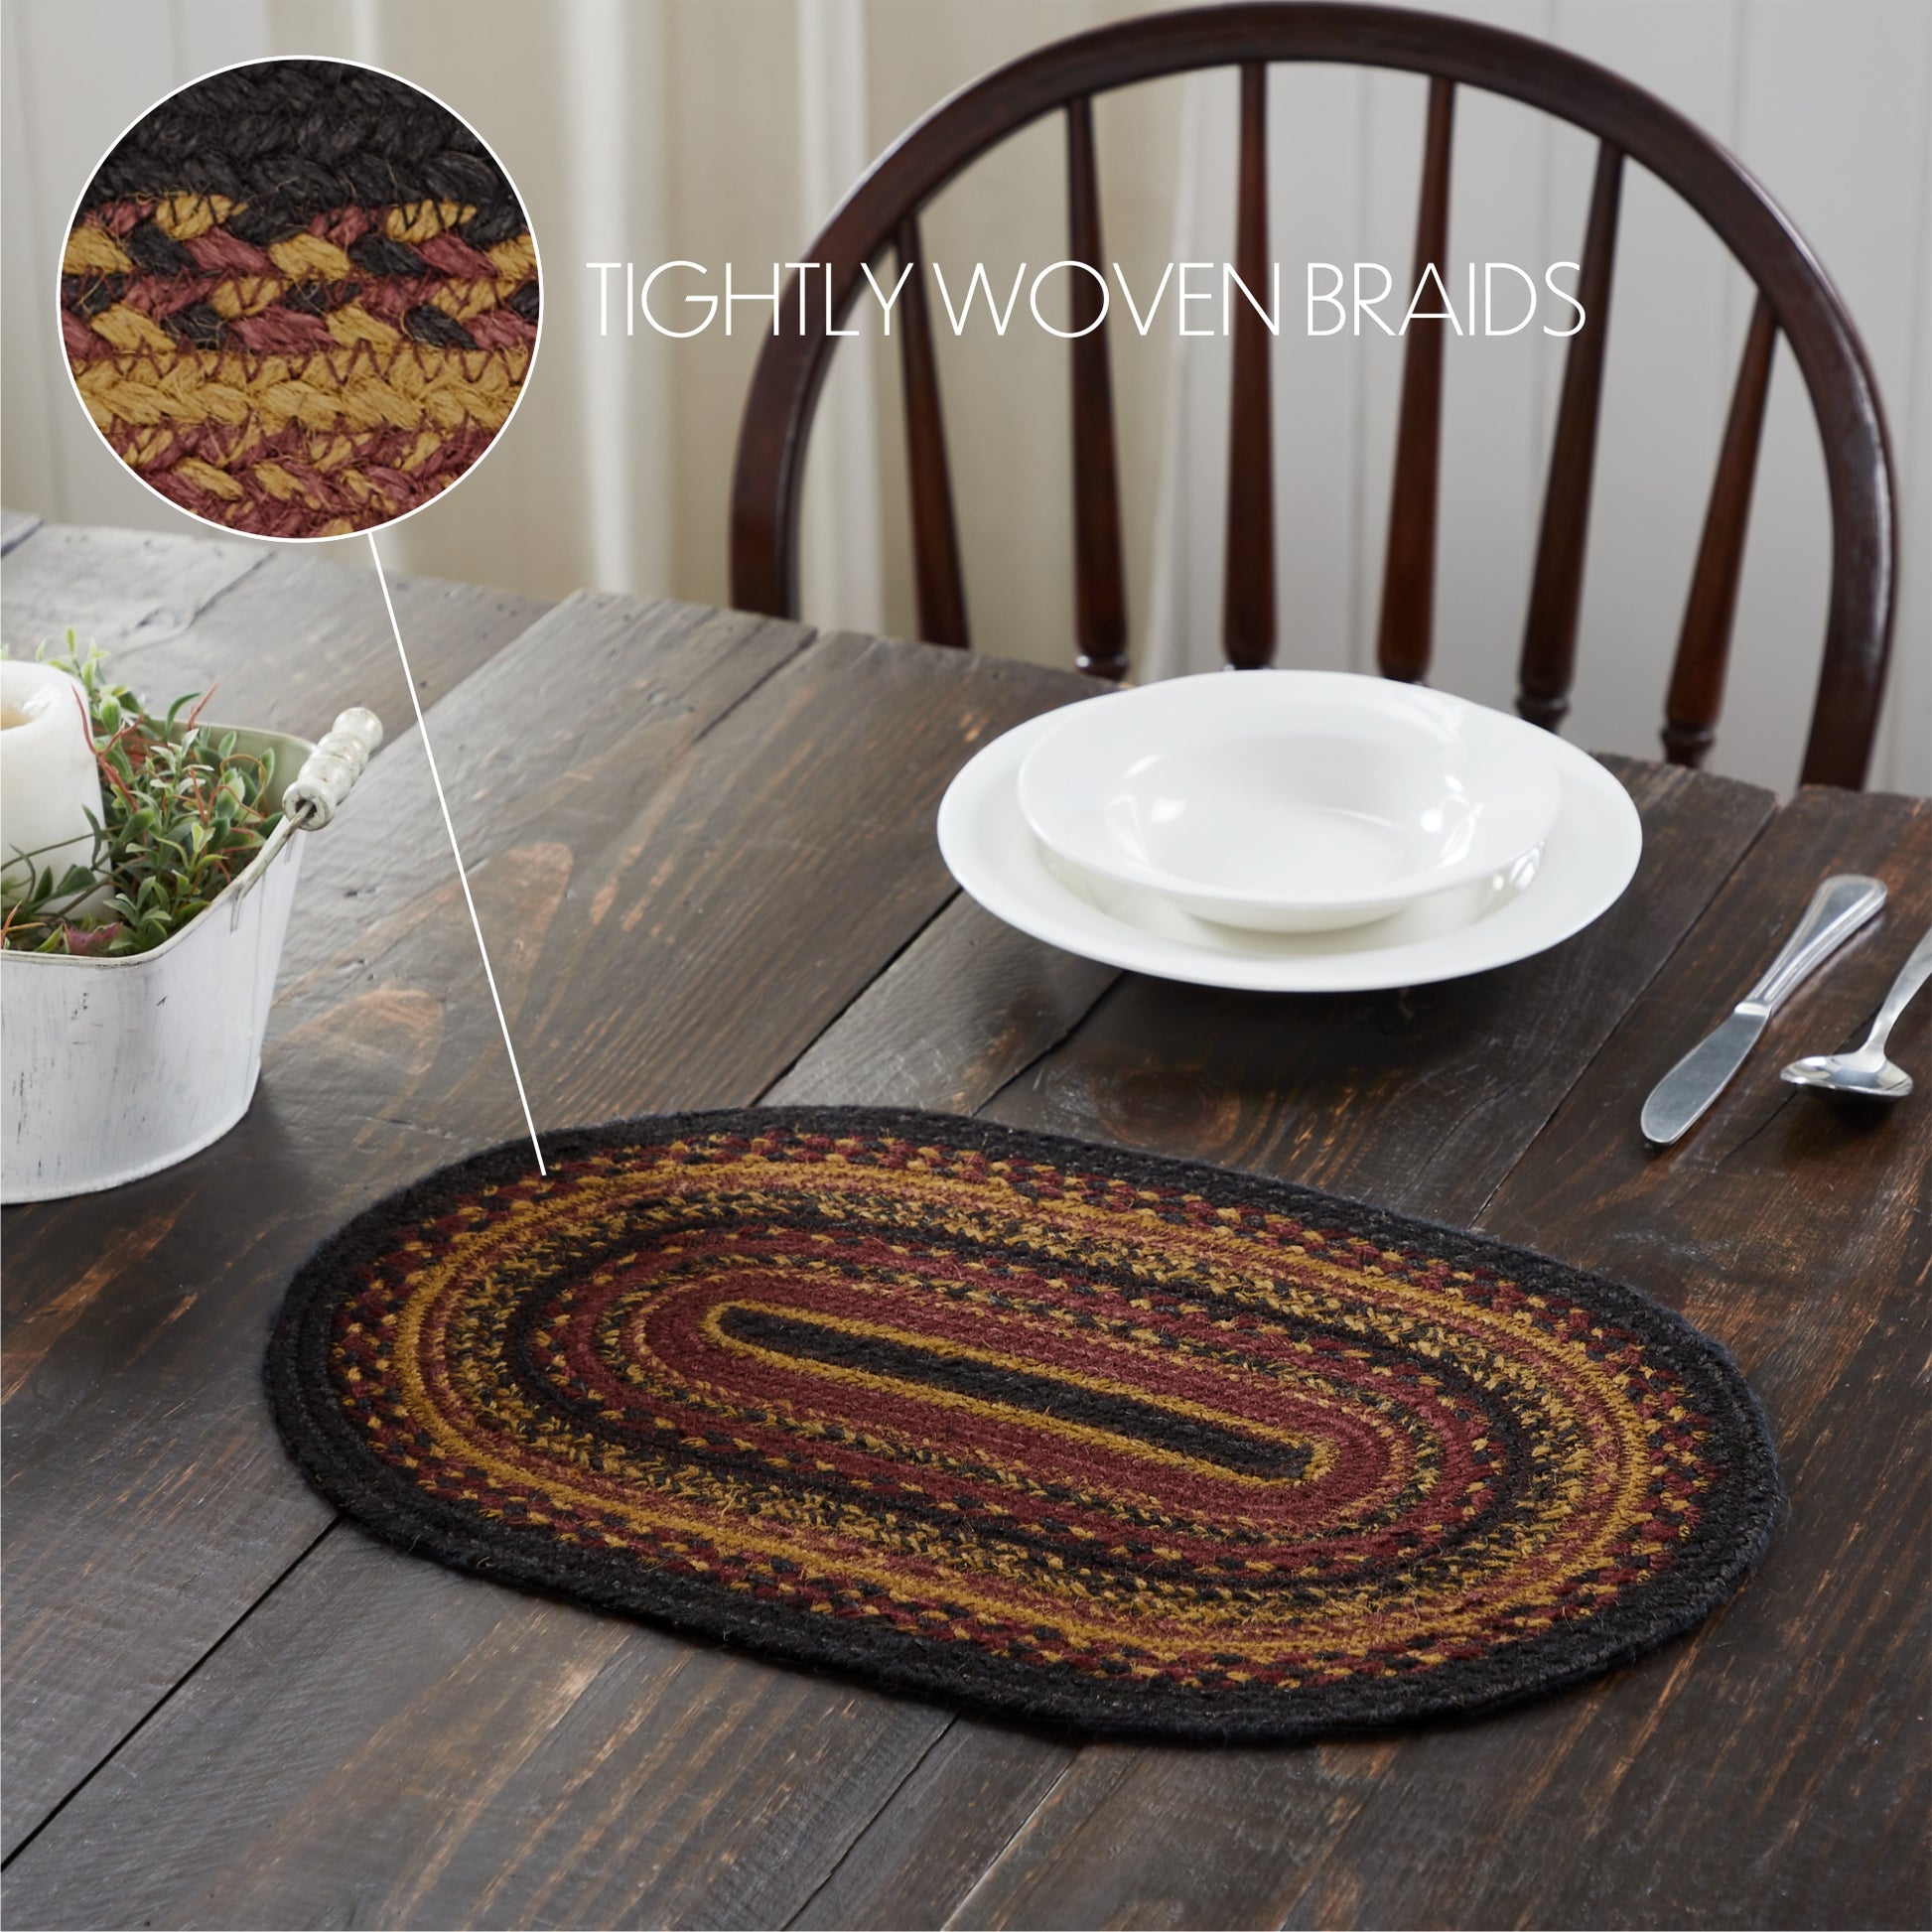 81362-Heritage-Farms-Jute-Oval-Placemat-10x15-image-2